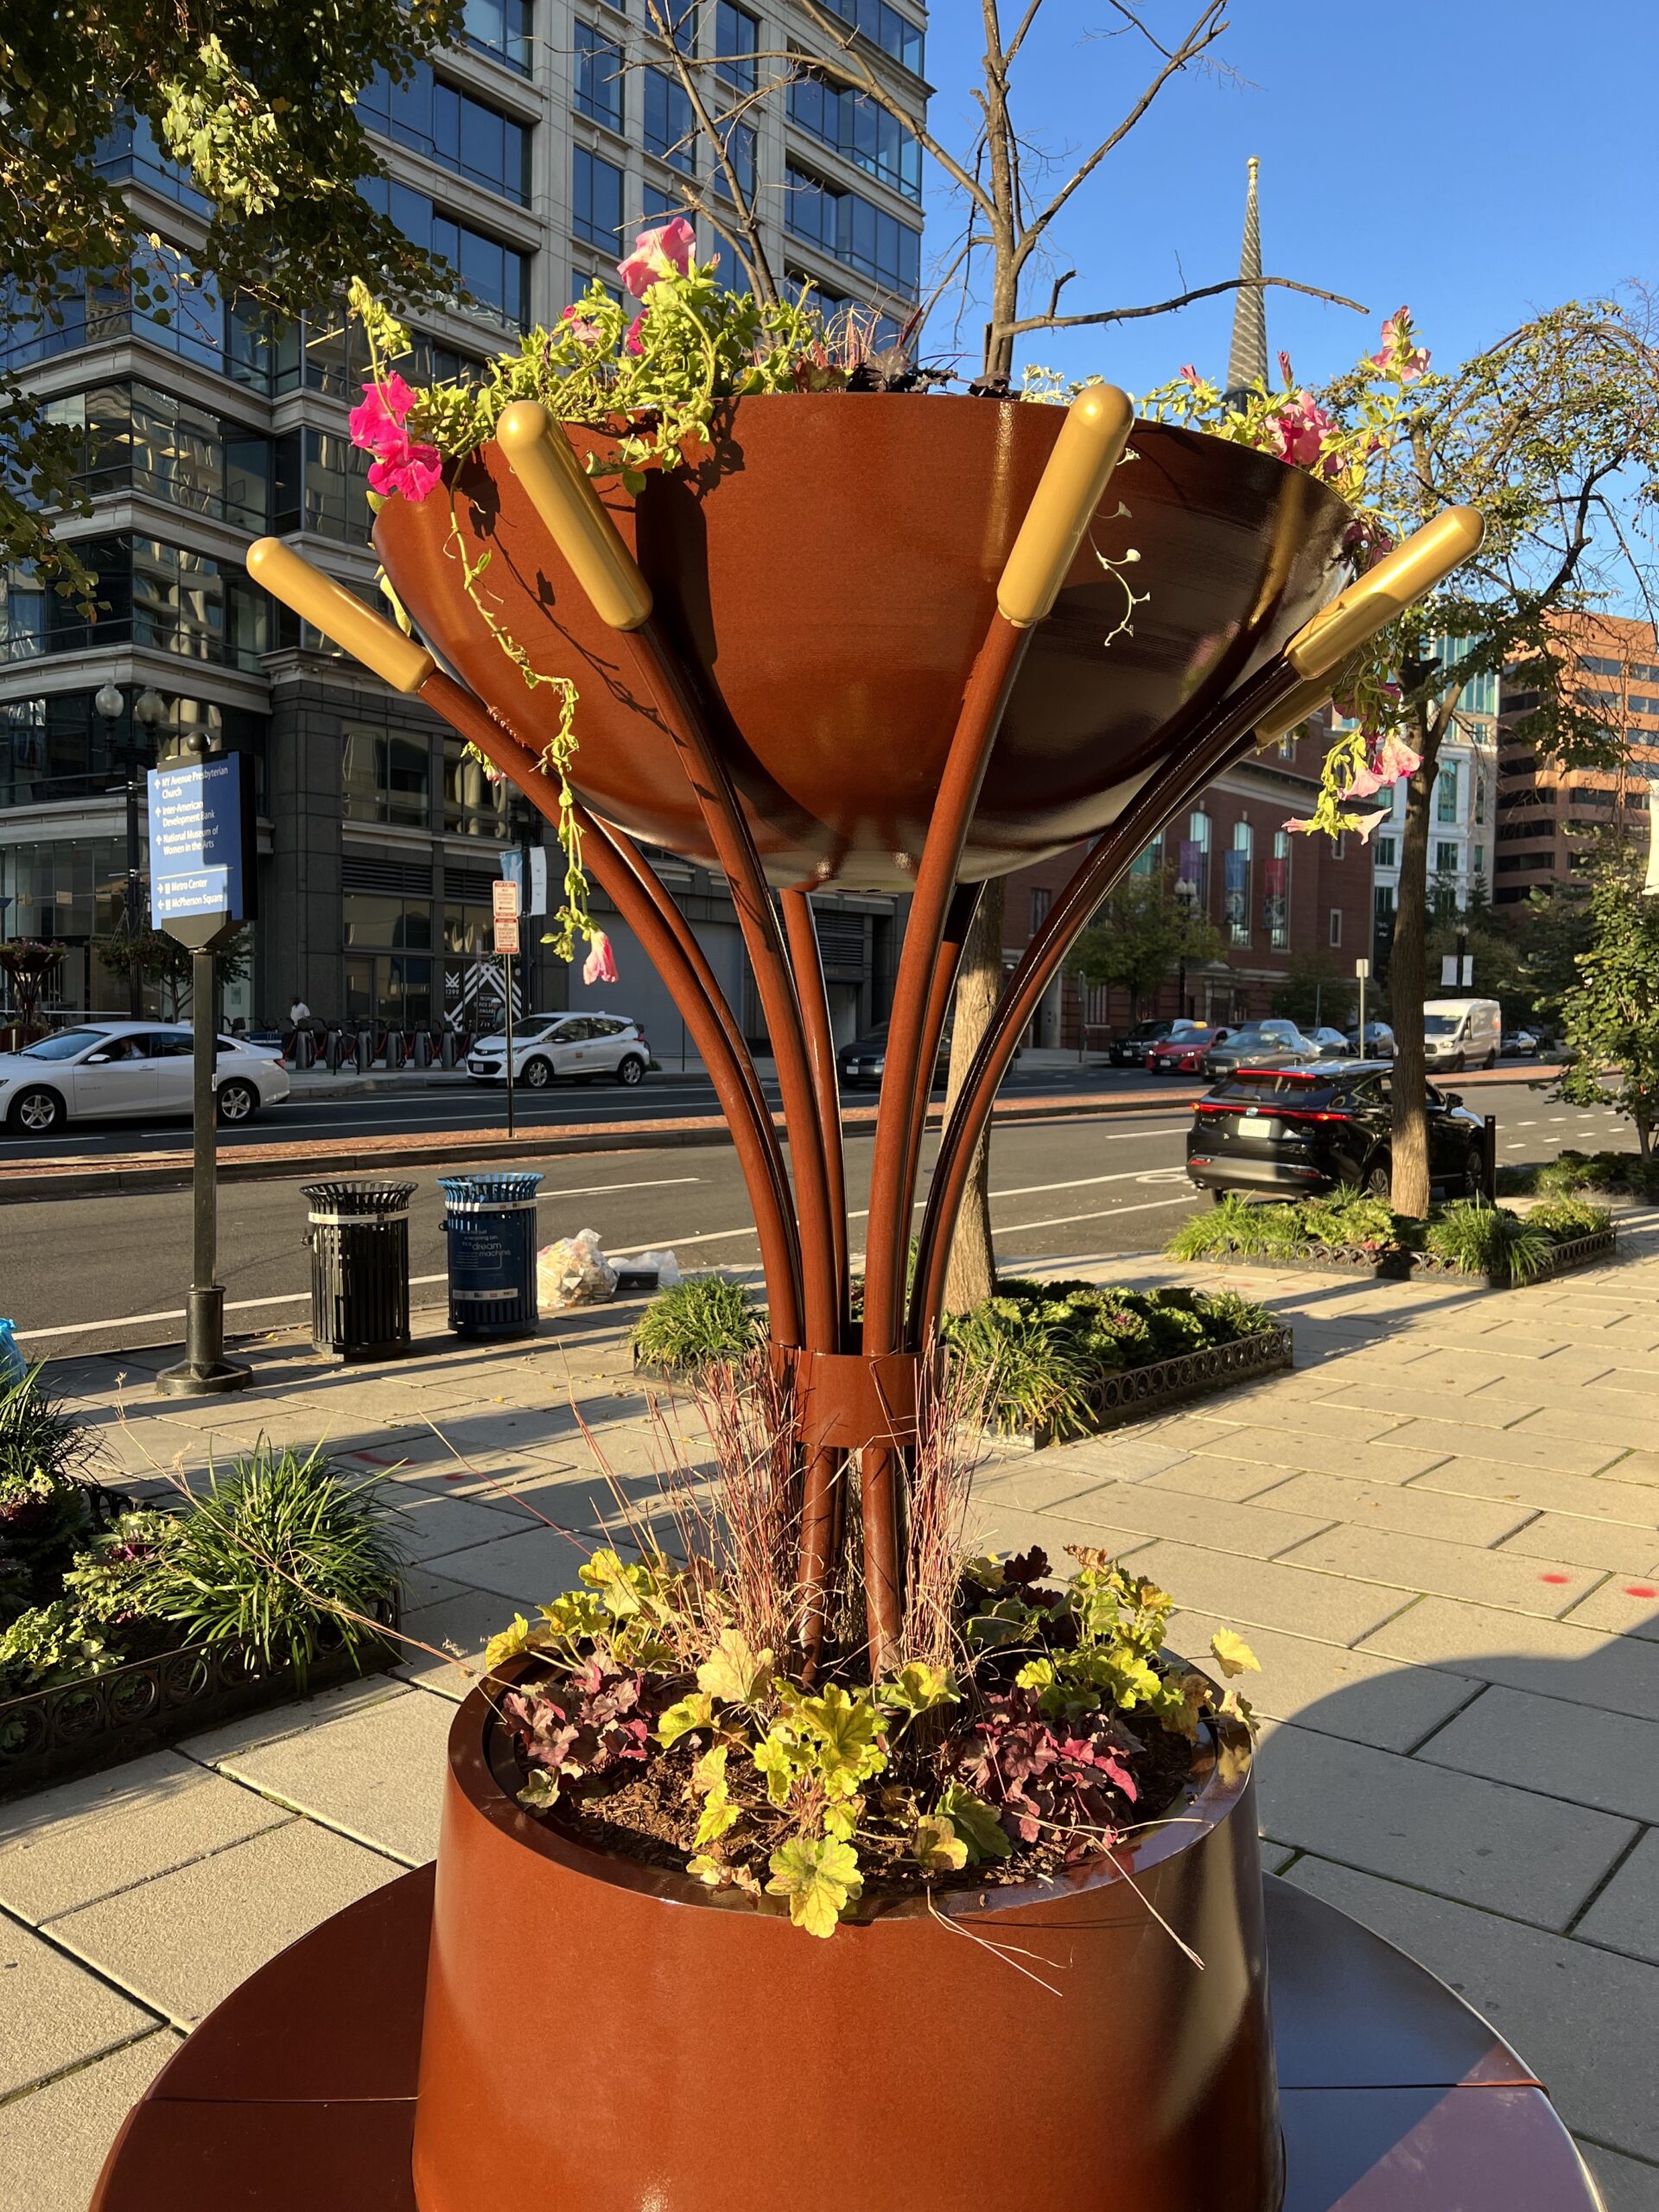 Planter with seating on the sidewalk